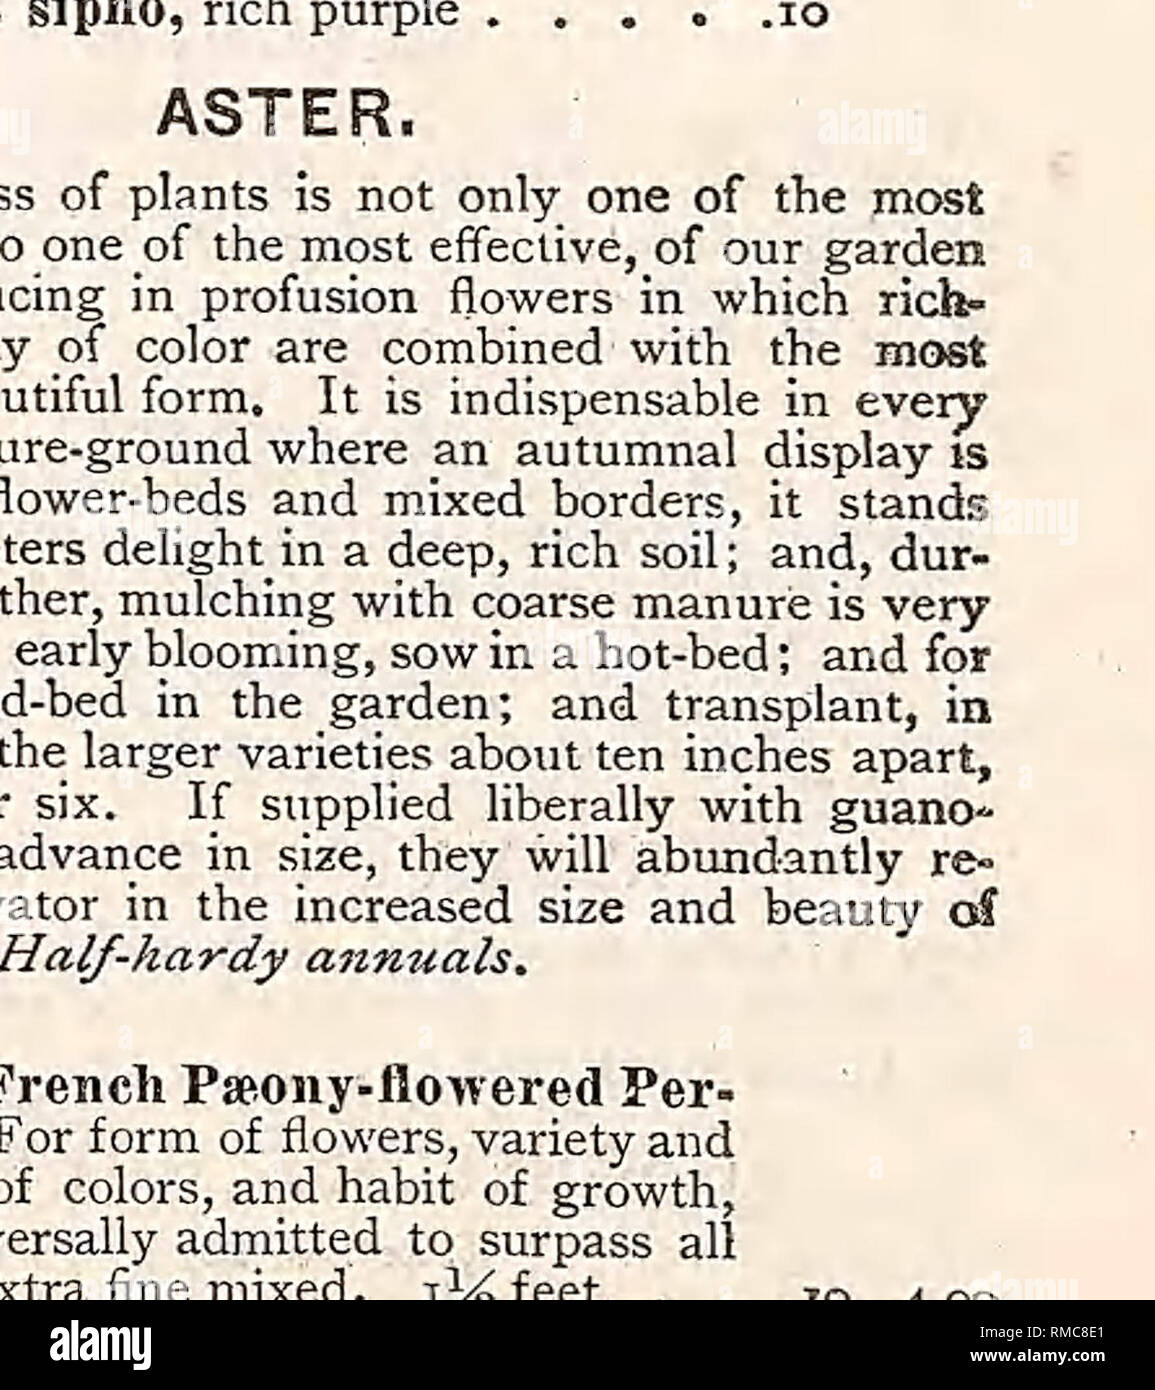 . Annual illustrated, descriptive catalogue of seeds, plants, vines, small fruits. Nurseries (Horticulture); Nursery stock; Vegetables; Seeds; Flowers; Shrubs; Ornamental trees; Fruit trees; Gardening; Equipment and supplies; Parker &amp; Wood (Firm). ASTER — Cotttinued. pkt. 33. Truffaut's Pseony-flowered Perfection. Collection containing 6 distinct colors . .40 84. Cockade, or Crown. The flowers are very double, with beautiful white centres, bor- dered with crimson, scarlet, violet or blue, making the.n very attractive. Mixed. ft • -IO 35. Cockade, or Crown, Collection contam- V'% 6 distinct Stock Photo